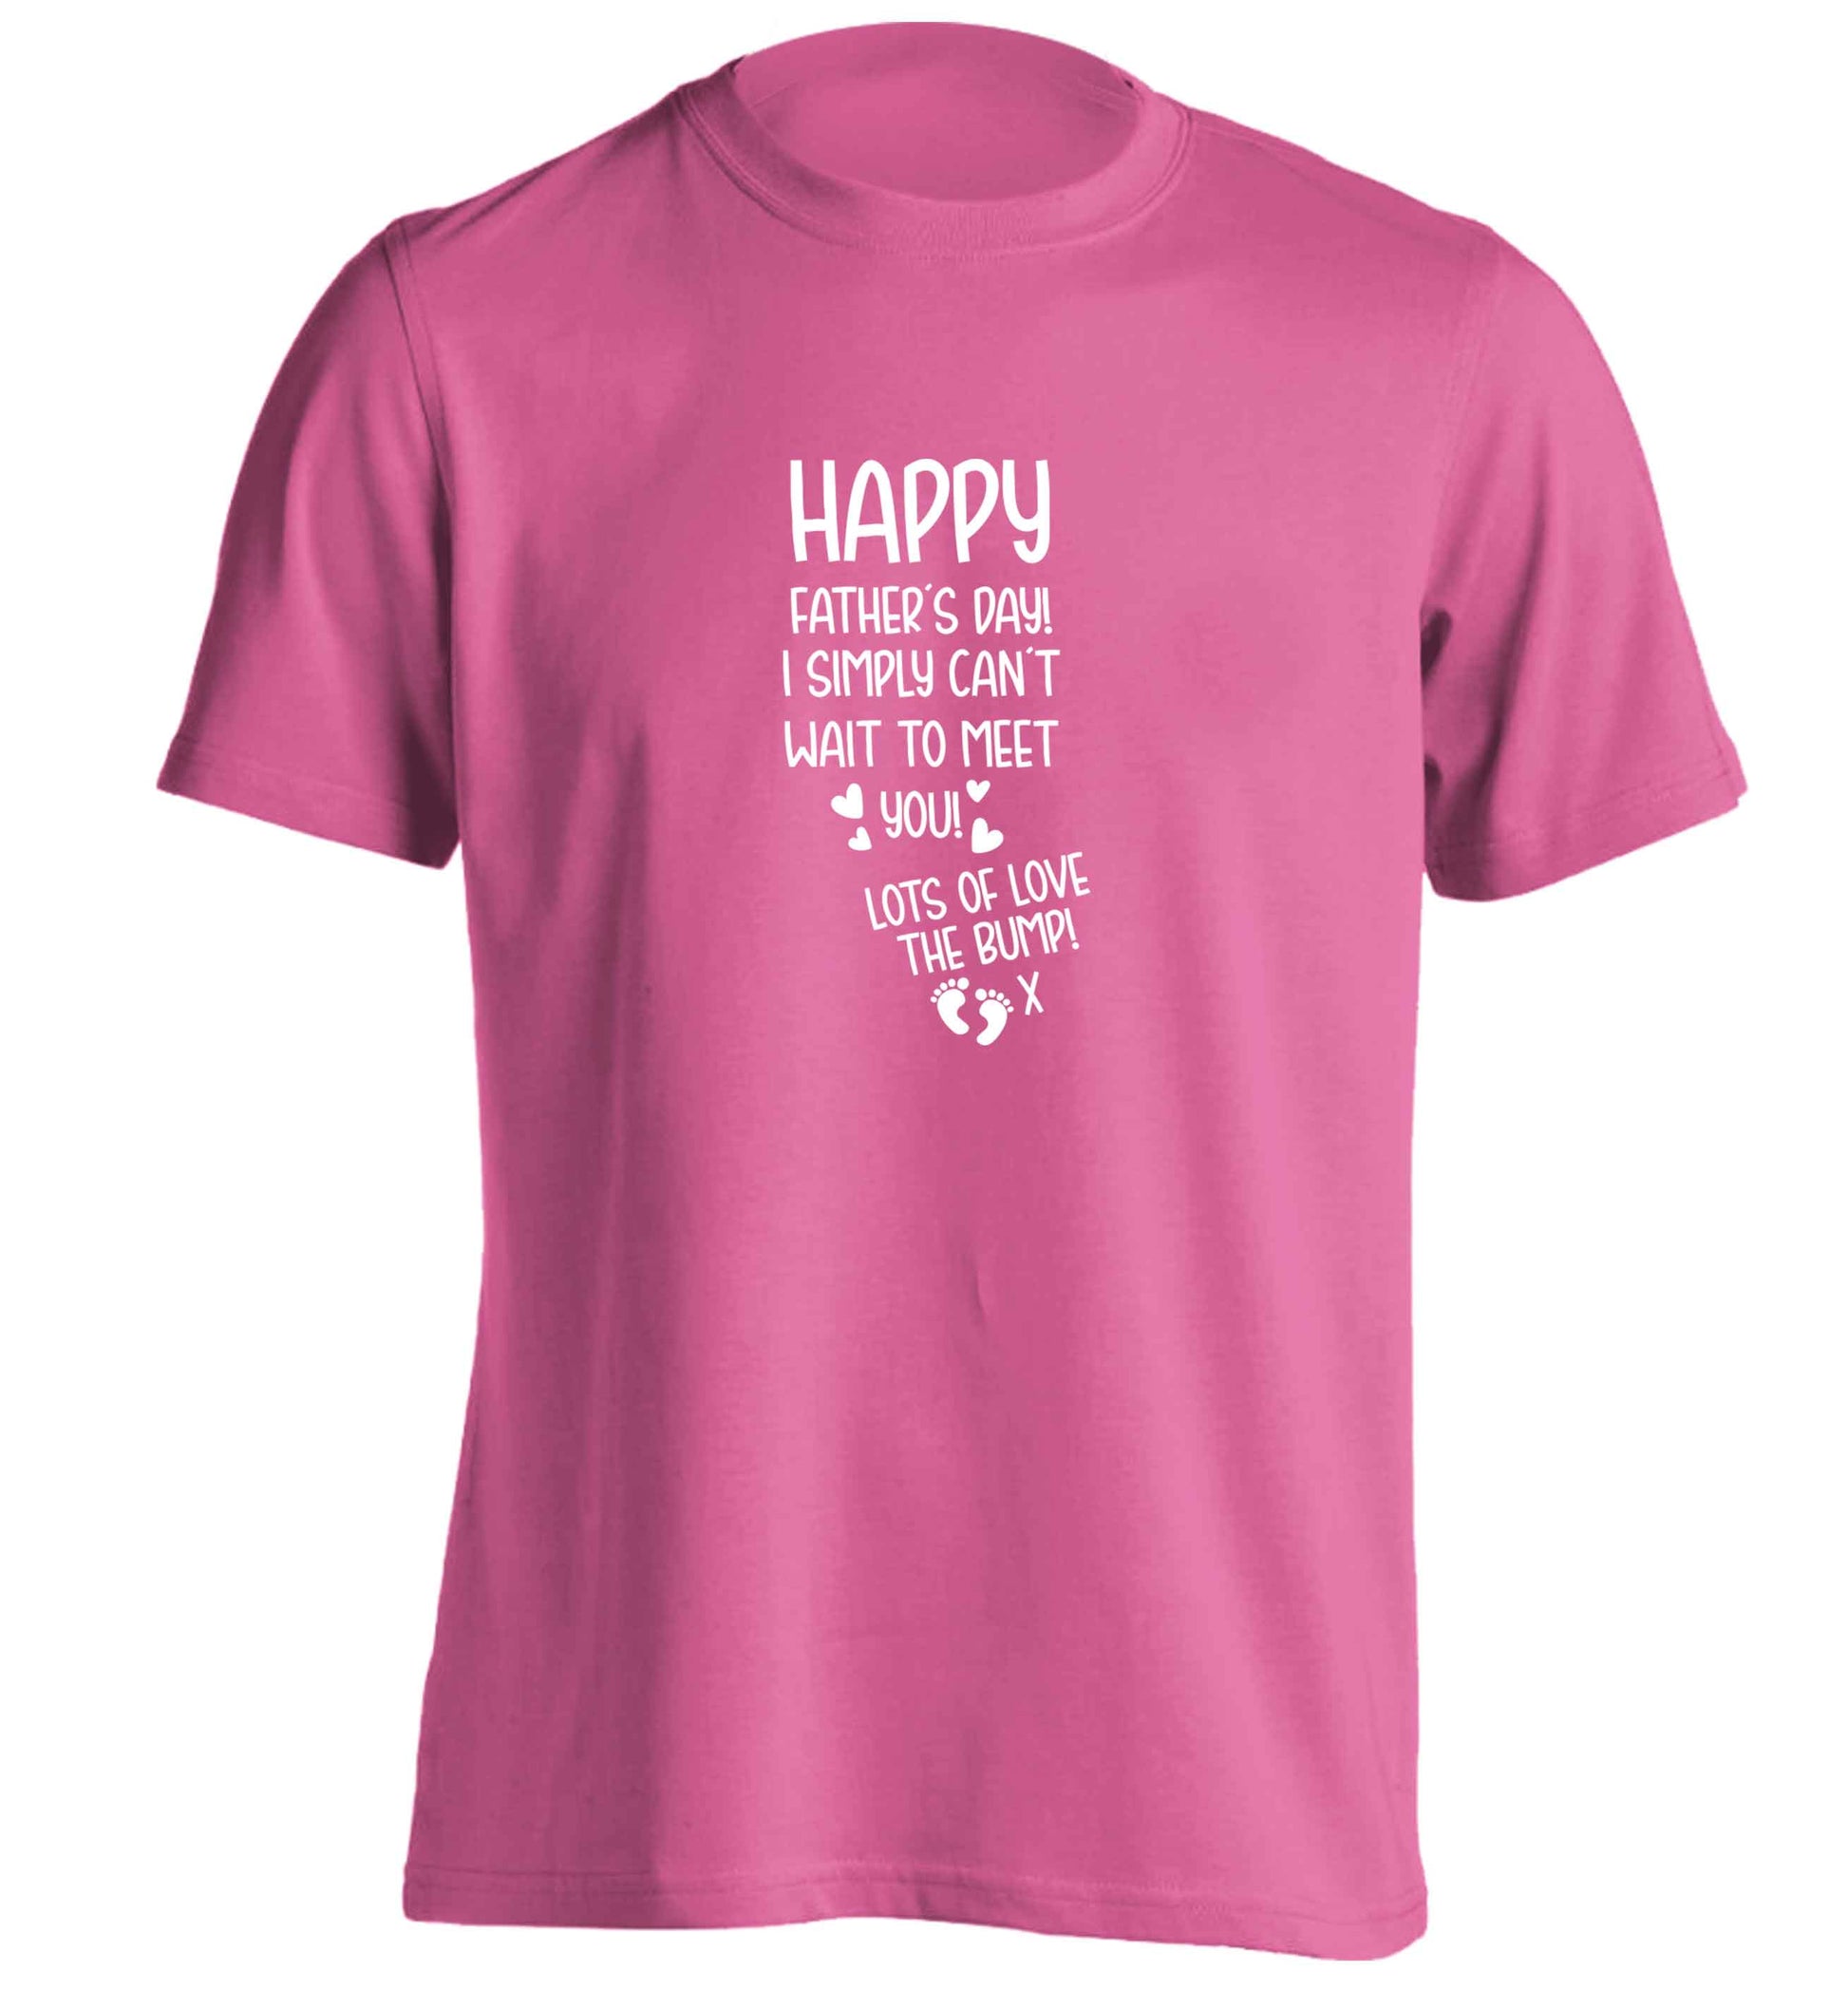 Happy Father's day daddy I can't wait to meet you lot's of love the bump! adults unisex pink Tshirt 2XL